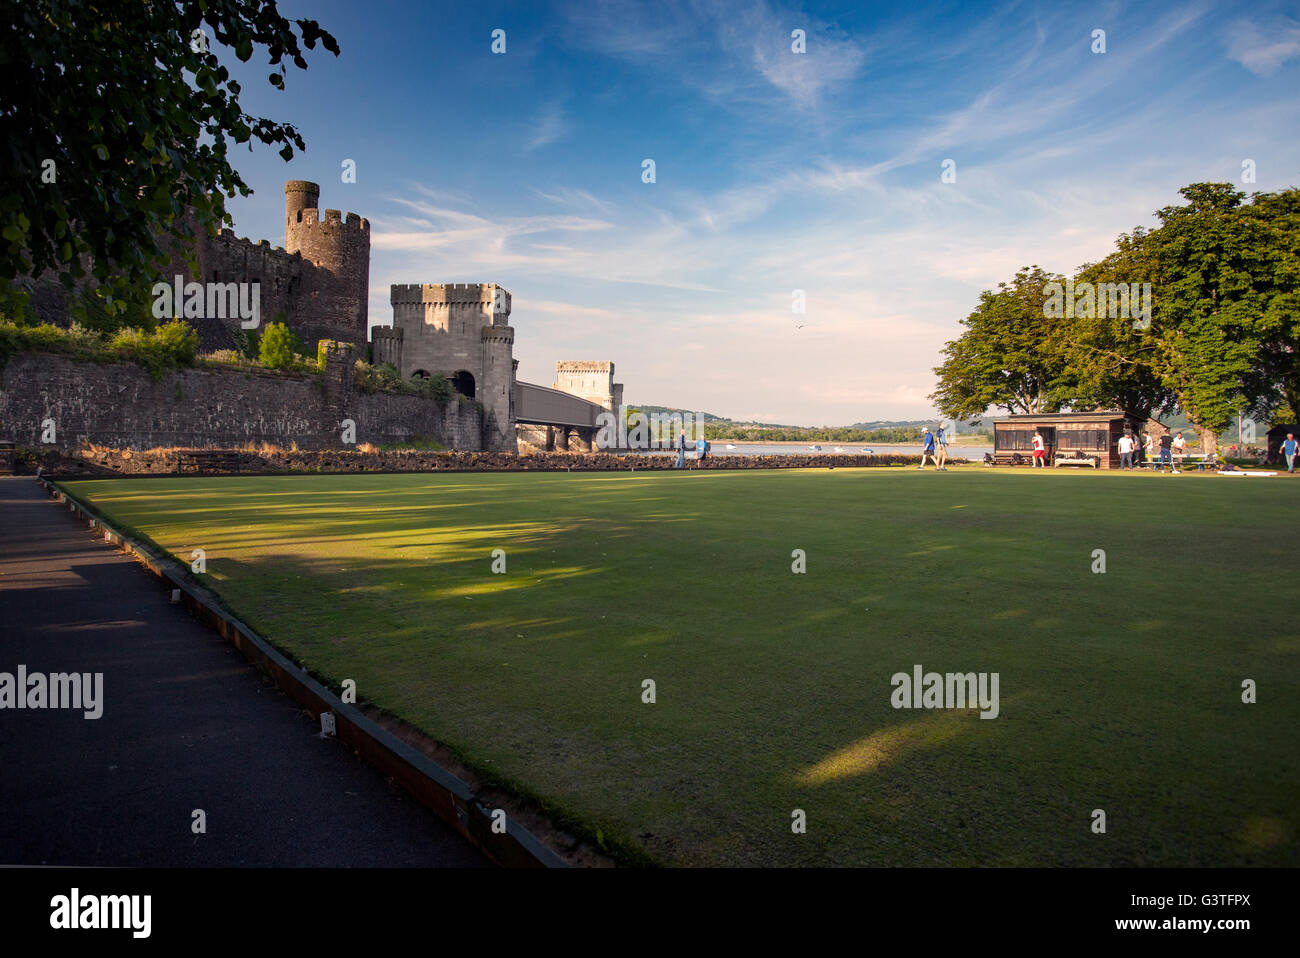 Cowny Bowling Club a crown green bowling venue next to the majestic medieval Conwy Castle on a hot summers evening with bowlers passing the time away relaxing on the green, Conwy, Wales, UK Stock Photo